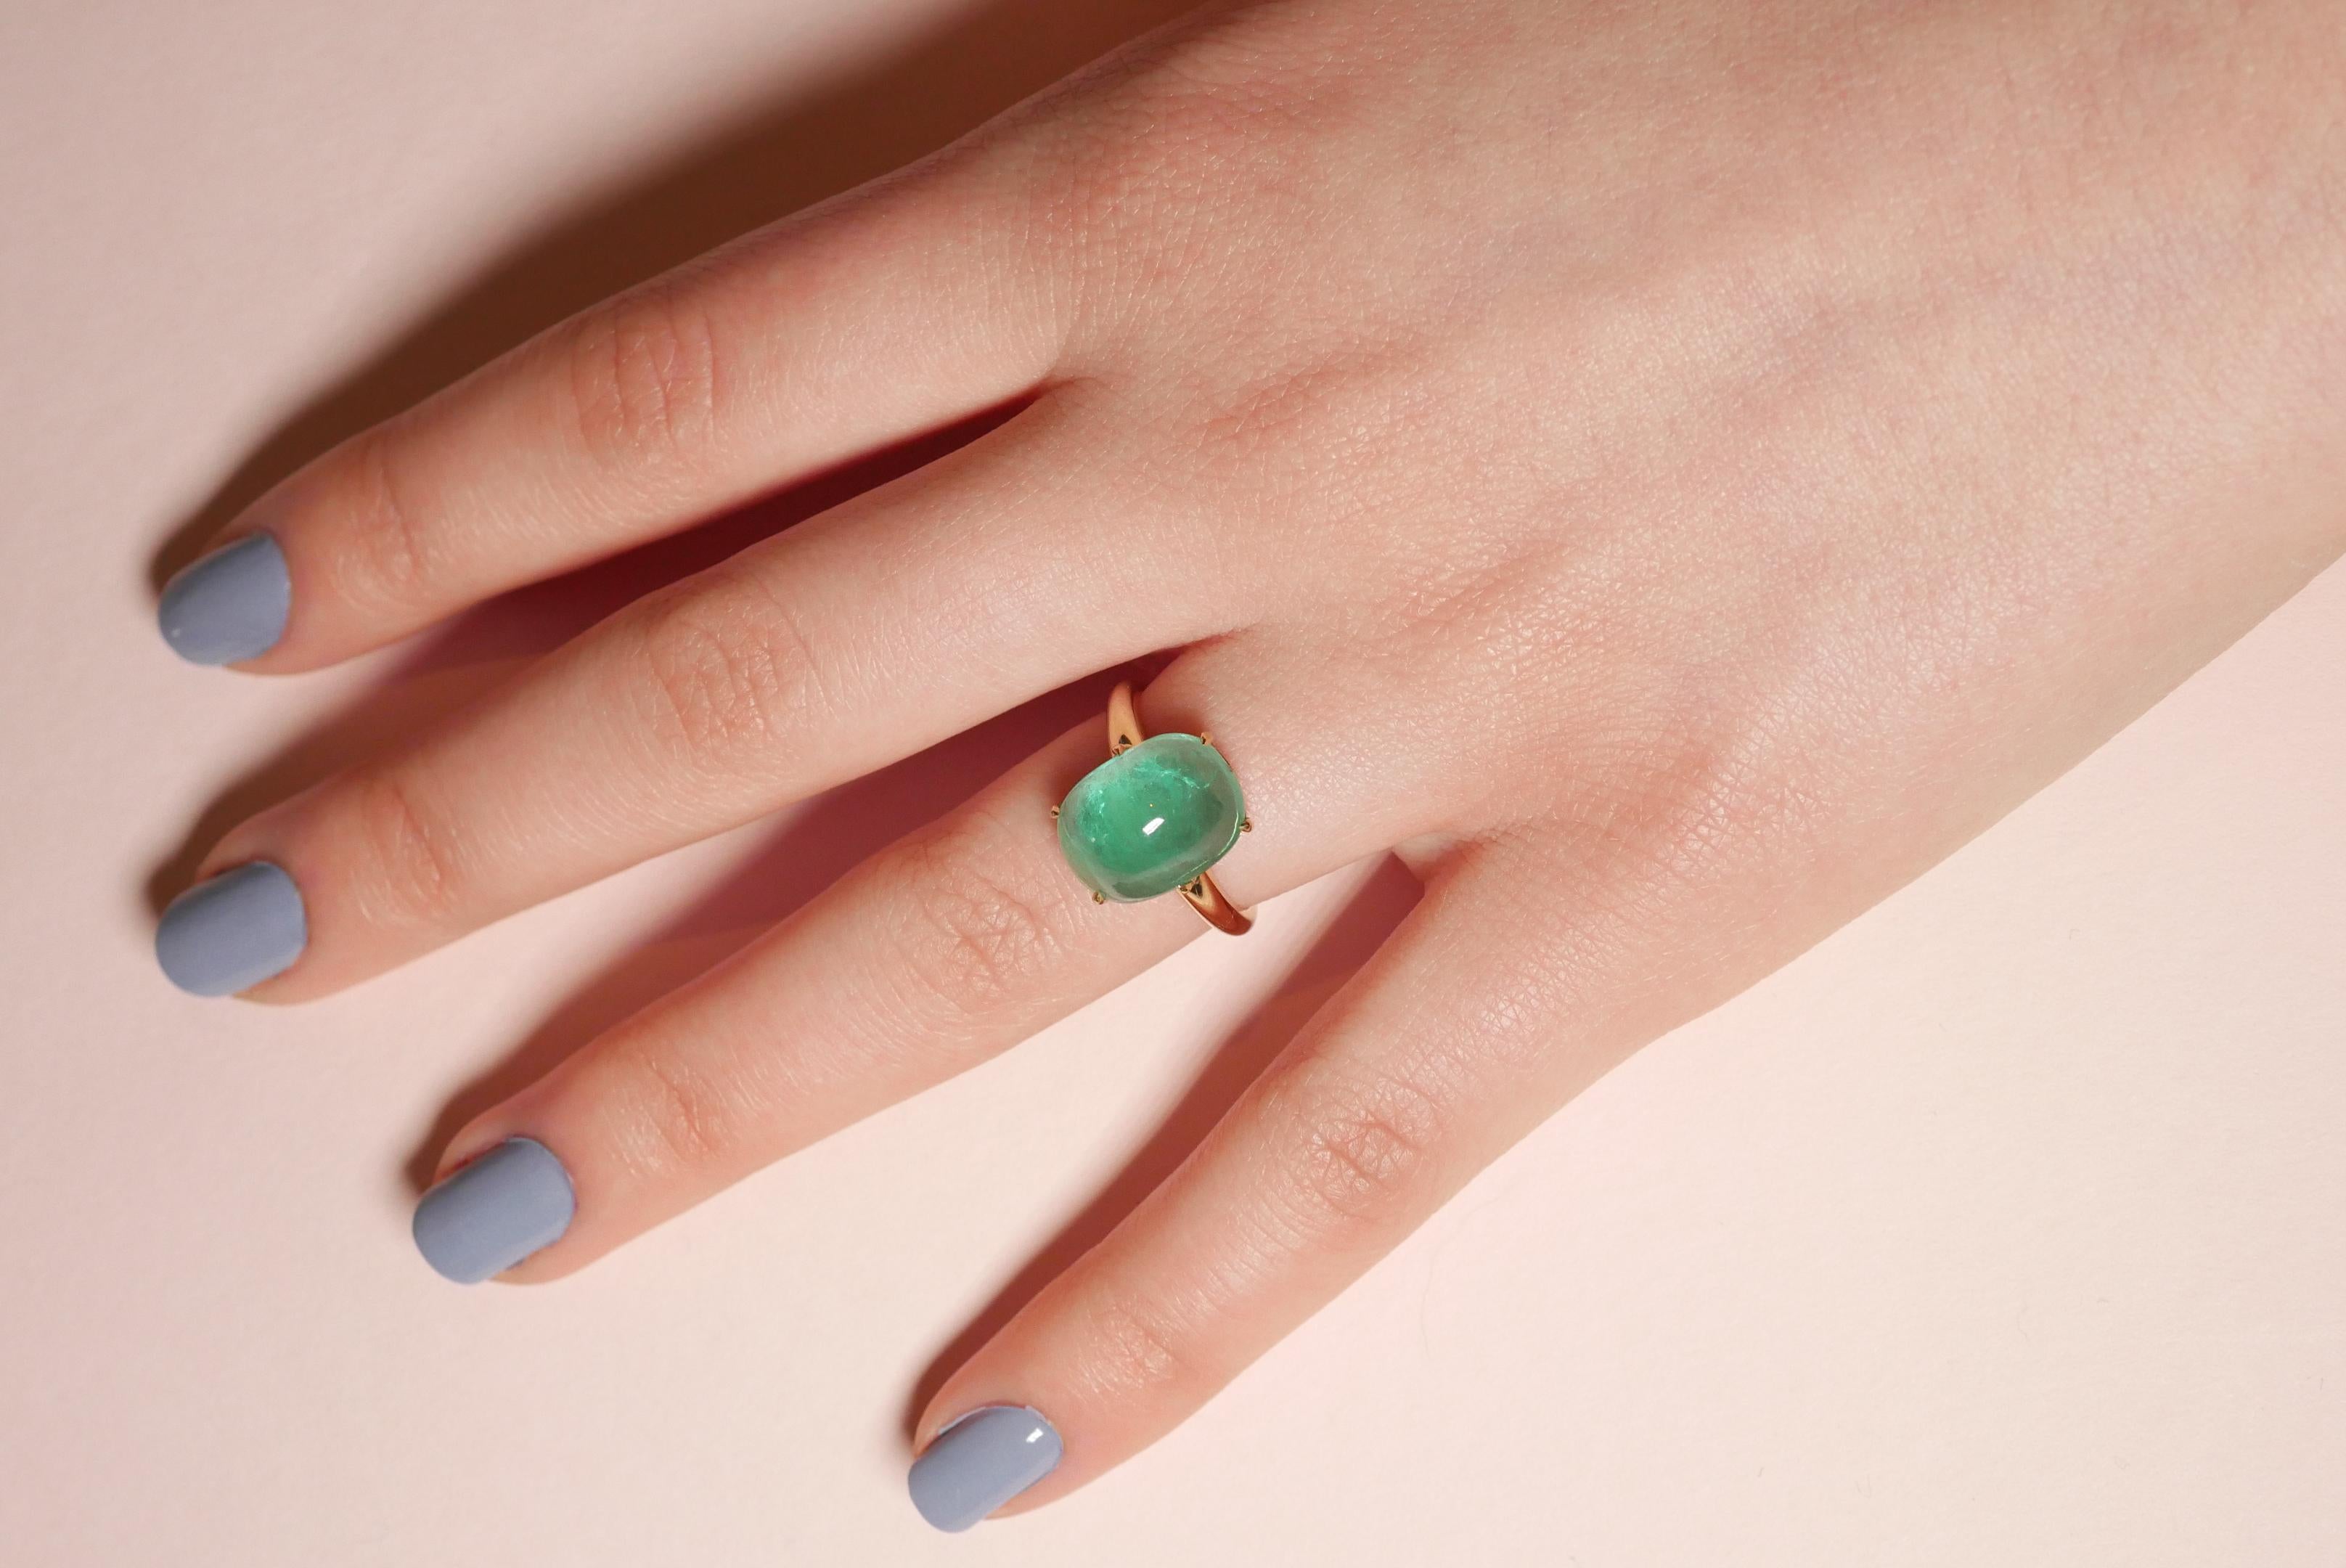 One of a kind dazzling 6.7 carat emerald cabochon ring in 18k yellow gold, with open back setting and talon-shaped claws complemented by a minimal and elegant smooth band. This contemporary handcrafted beauty is versatile and easy to wear on its own